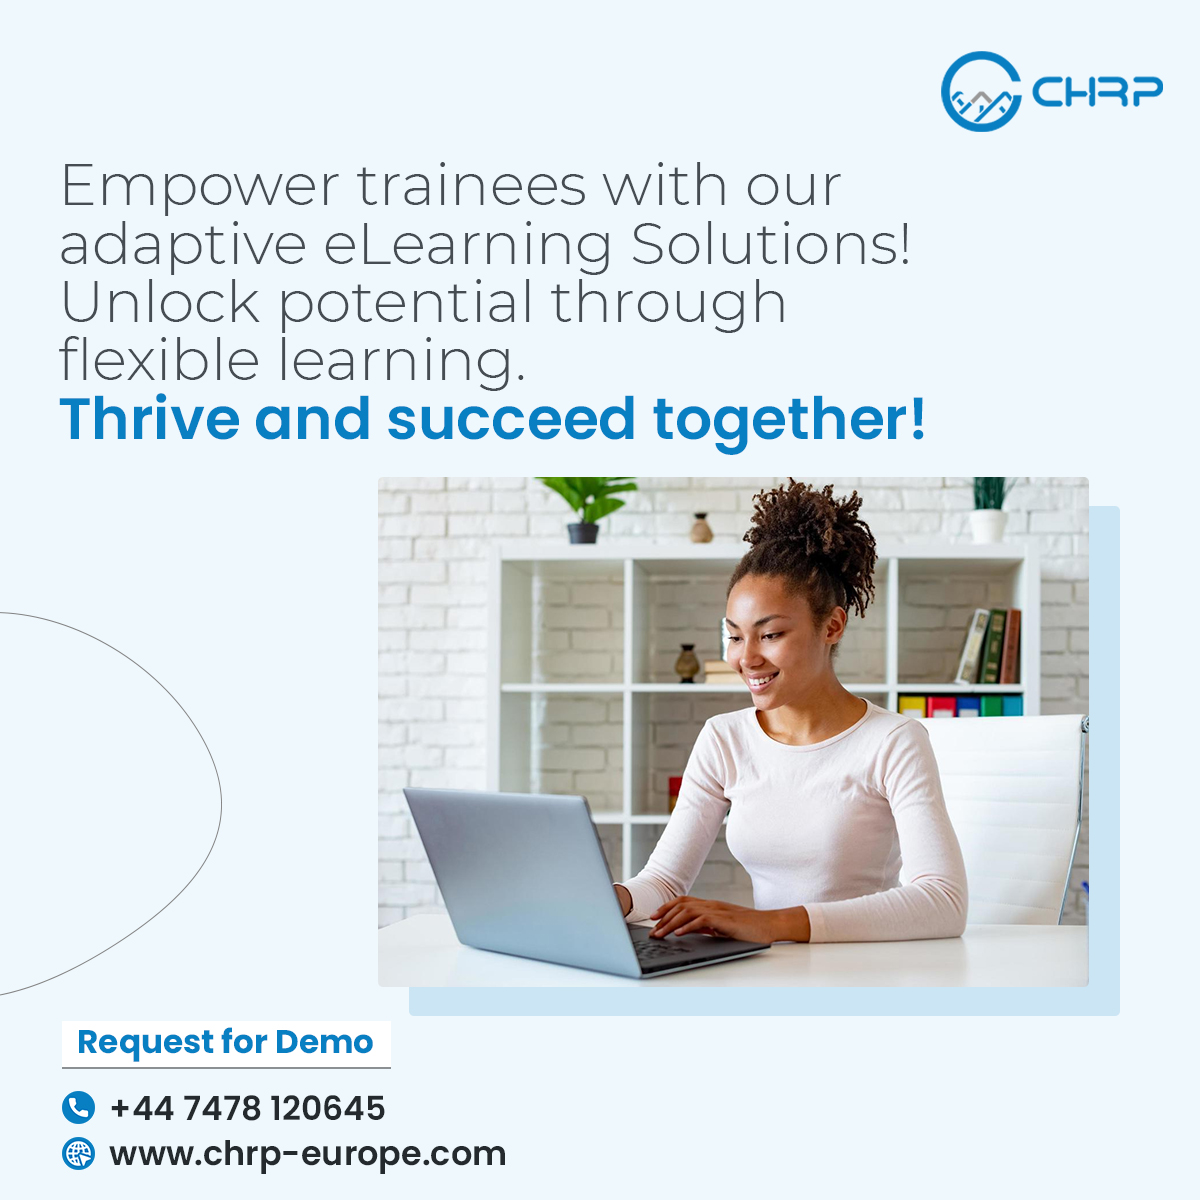 Empower trainees with our adaptive eLearning! 📚💡 Unlock potential through flexible learning. 🚀✨ Thrive and succeed together! 💪🌱

For Demo
📱 +44 7478 120645 📧 reach@chrp-europe.com 🌐 chrp-europe.com

 #employeetraining #Vr #Ar #Mr #Xr #safetytraining